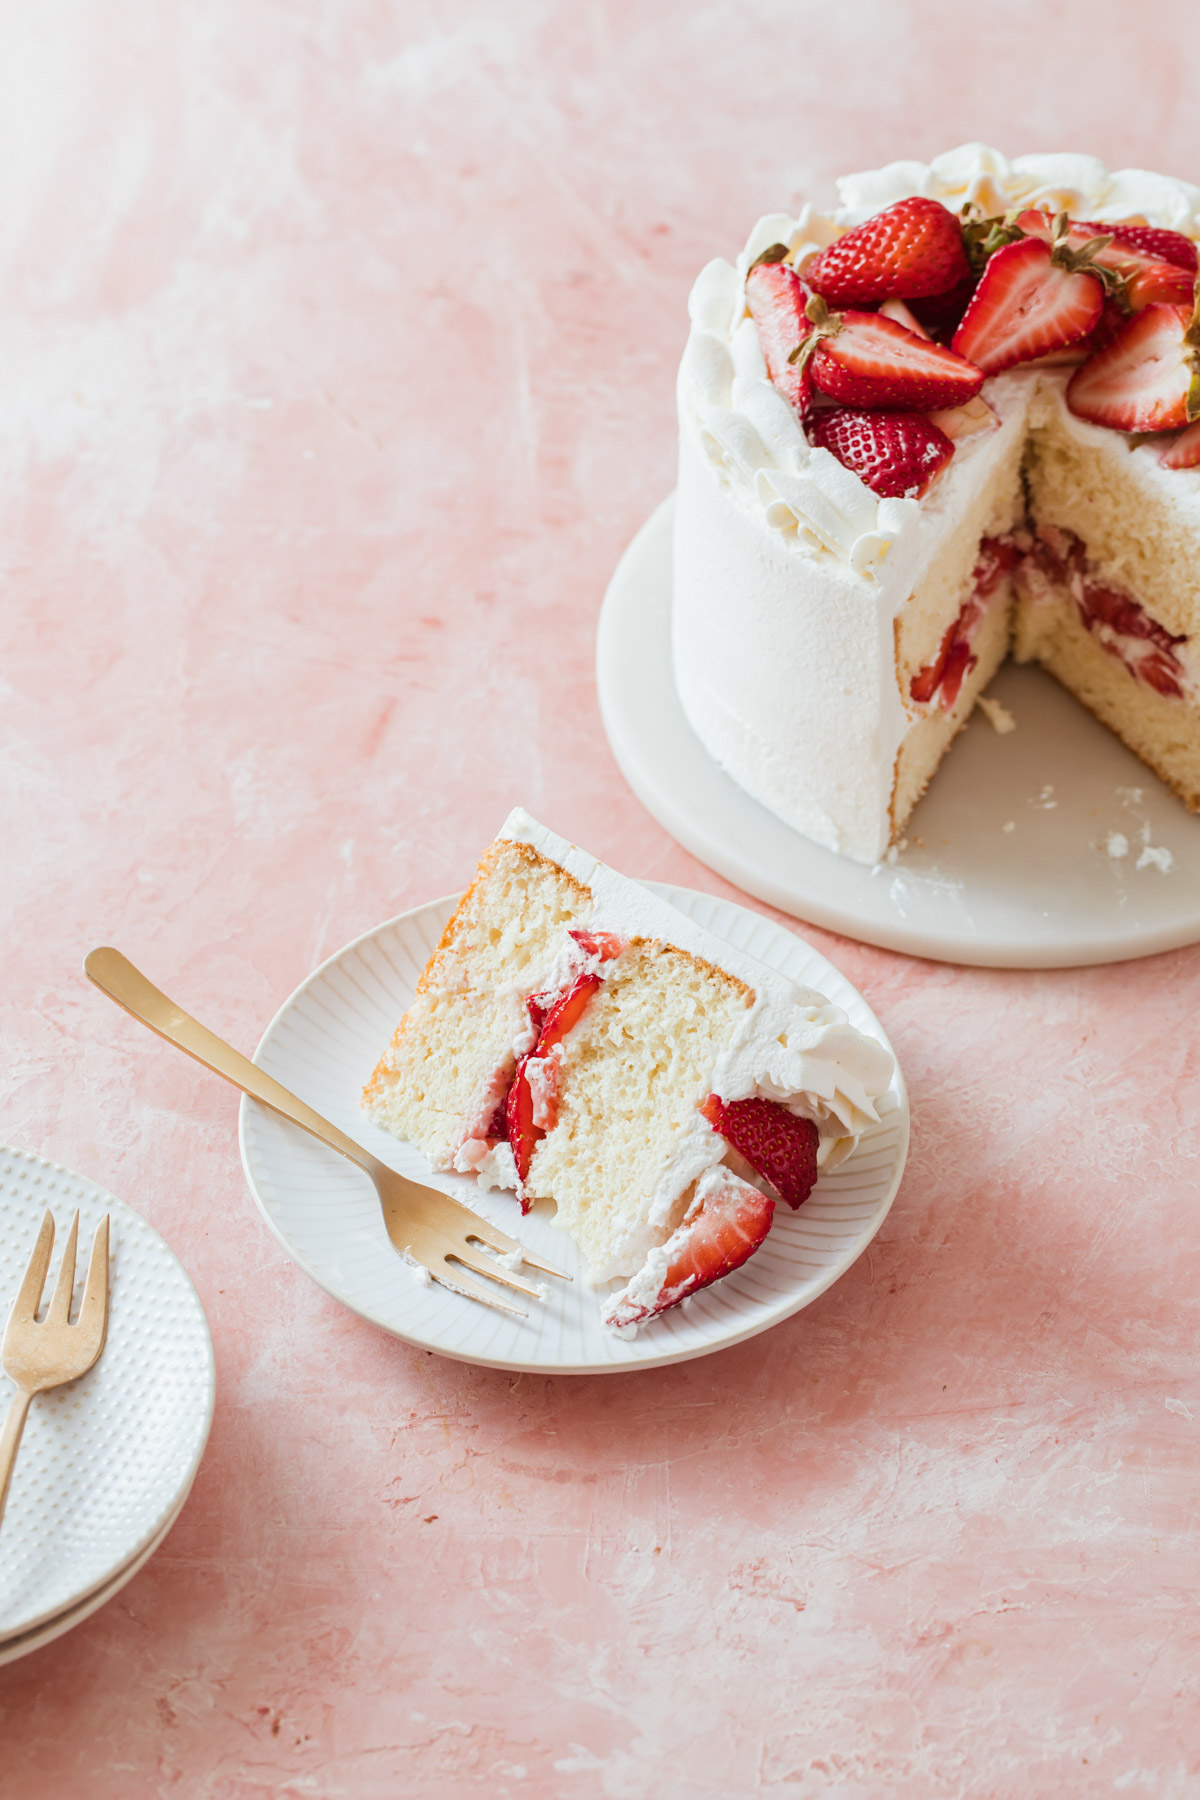 A slice of mii chiffon cake with sliced strawberries and whipped cream frosting